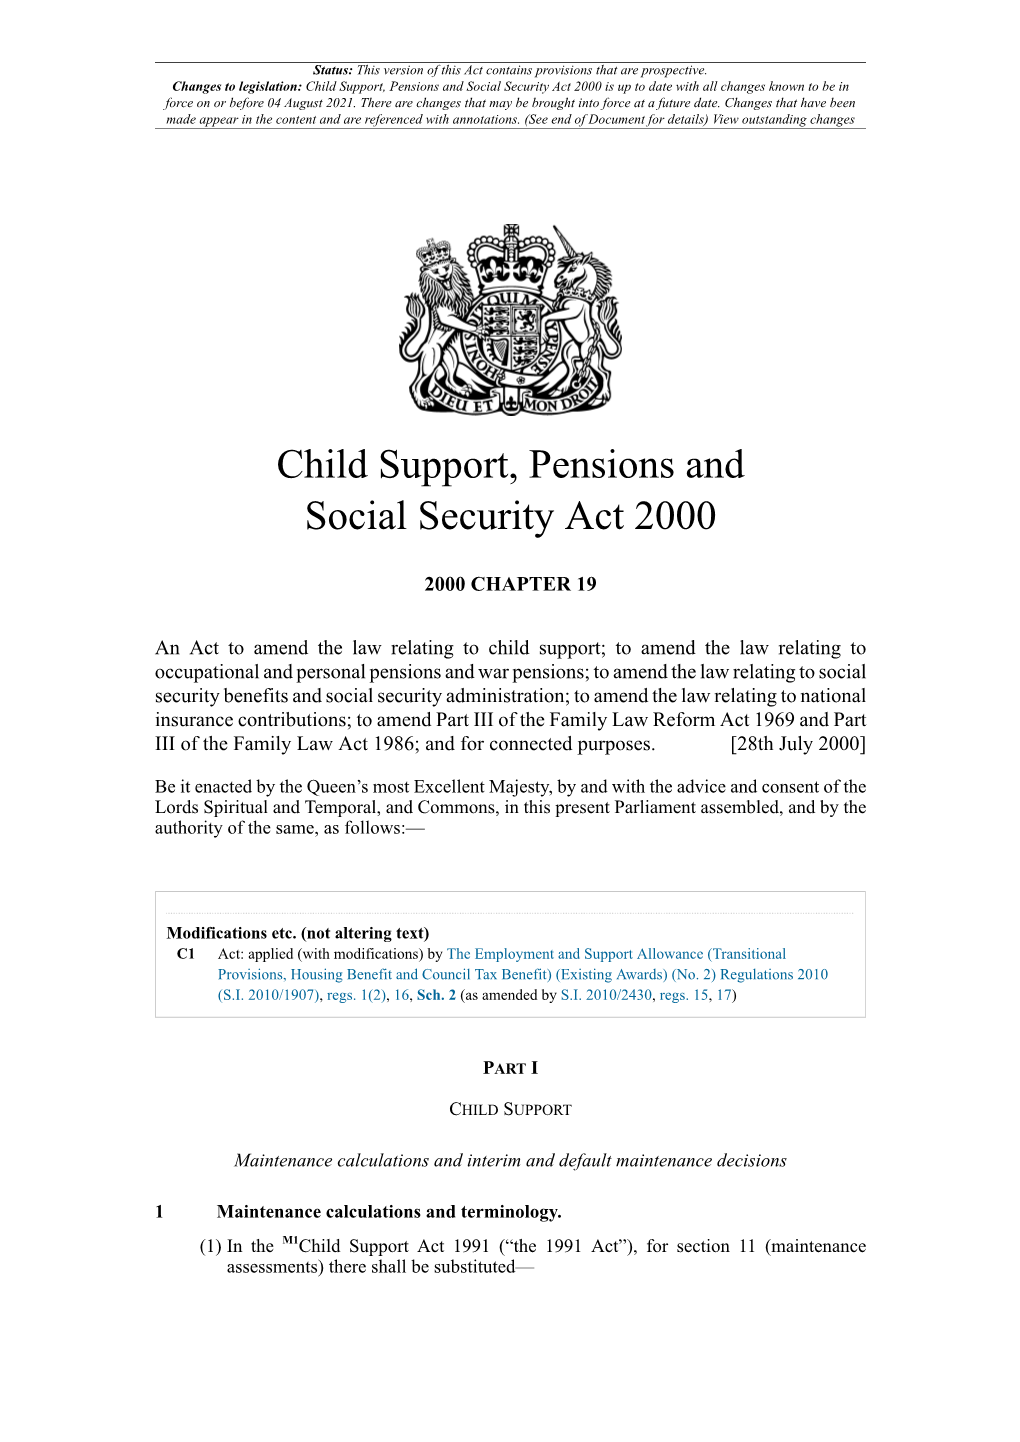 Child Support, Pensions and Social Security Act 2000 Is up to Date with All Changes Known to Be in Force on Or Before 04 August 2021